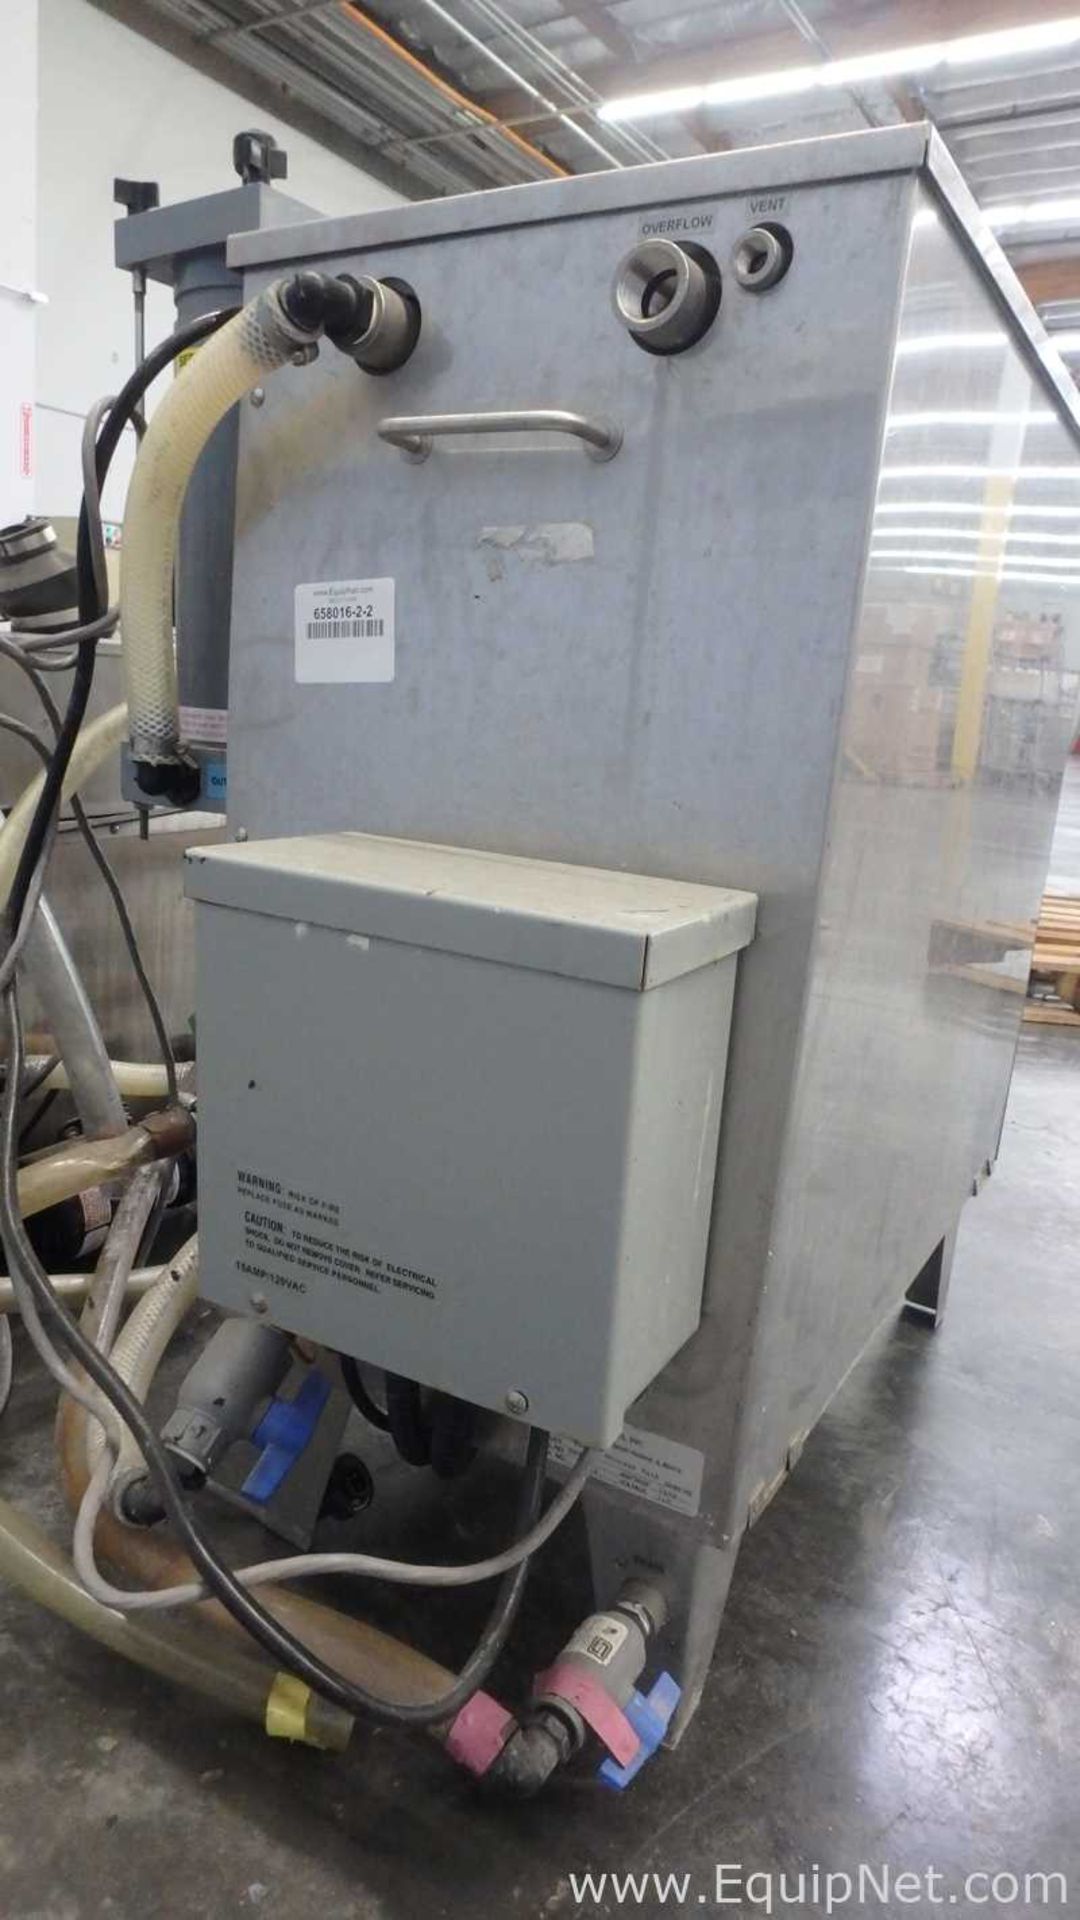 ESMA Inc. E700 Ultrasonic Cleaning System with E997 30Gal Heated Storage Tank - Image 25 of 26